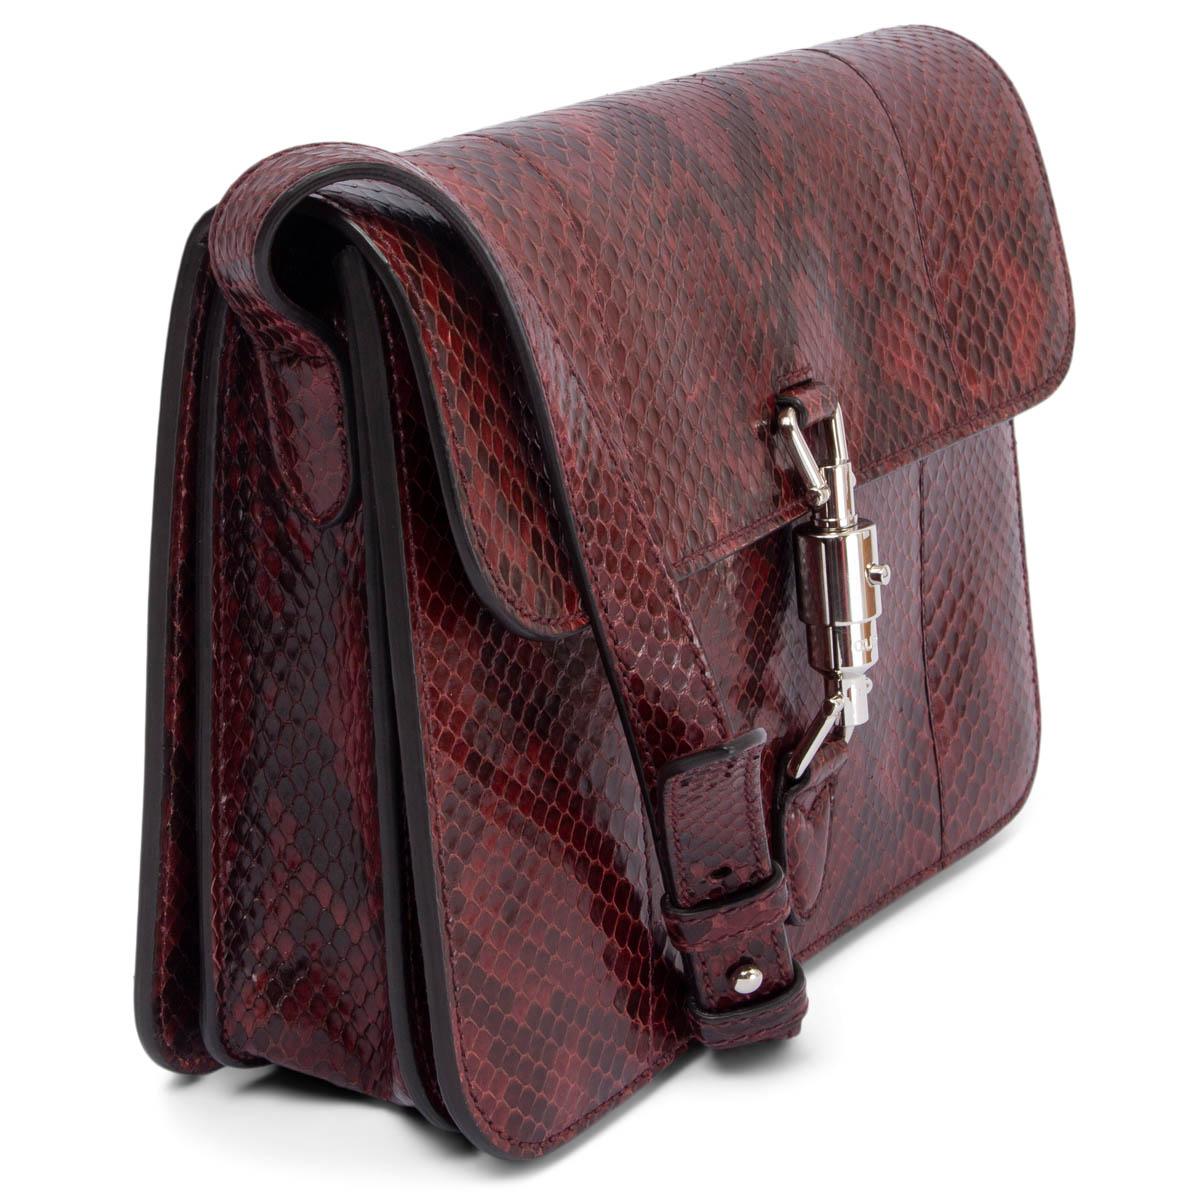 100% authentic Gucci Jackie Soft Flap shoulder bag in burgundy python snakeskin featuring silver-tone piston push-lock closure that opens to a roomy nude suede lined interior. Has been carried once and is in virtually new condition. Comes with dust